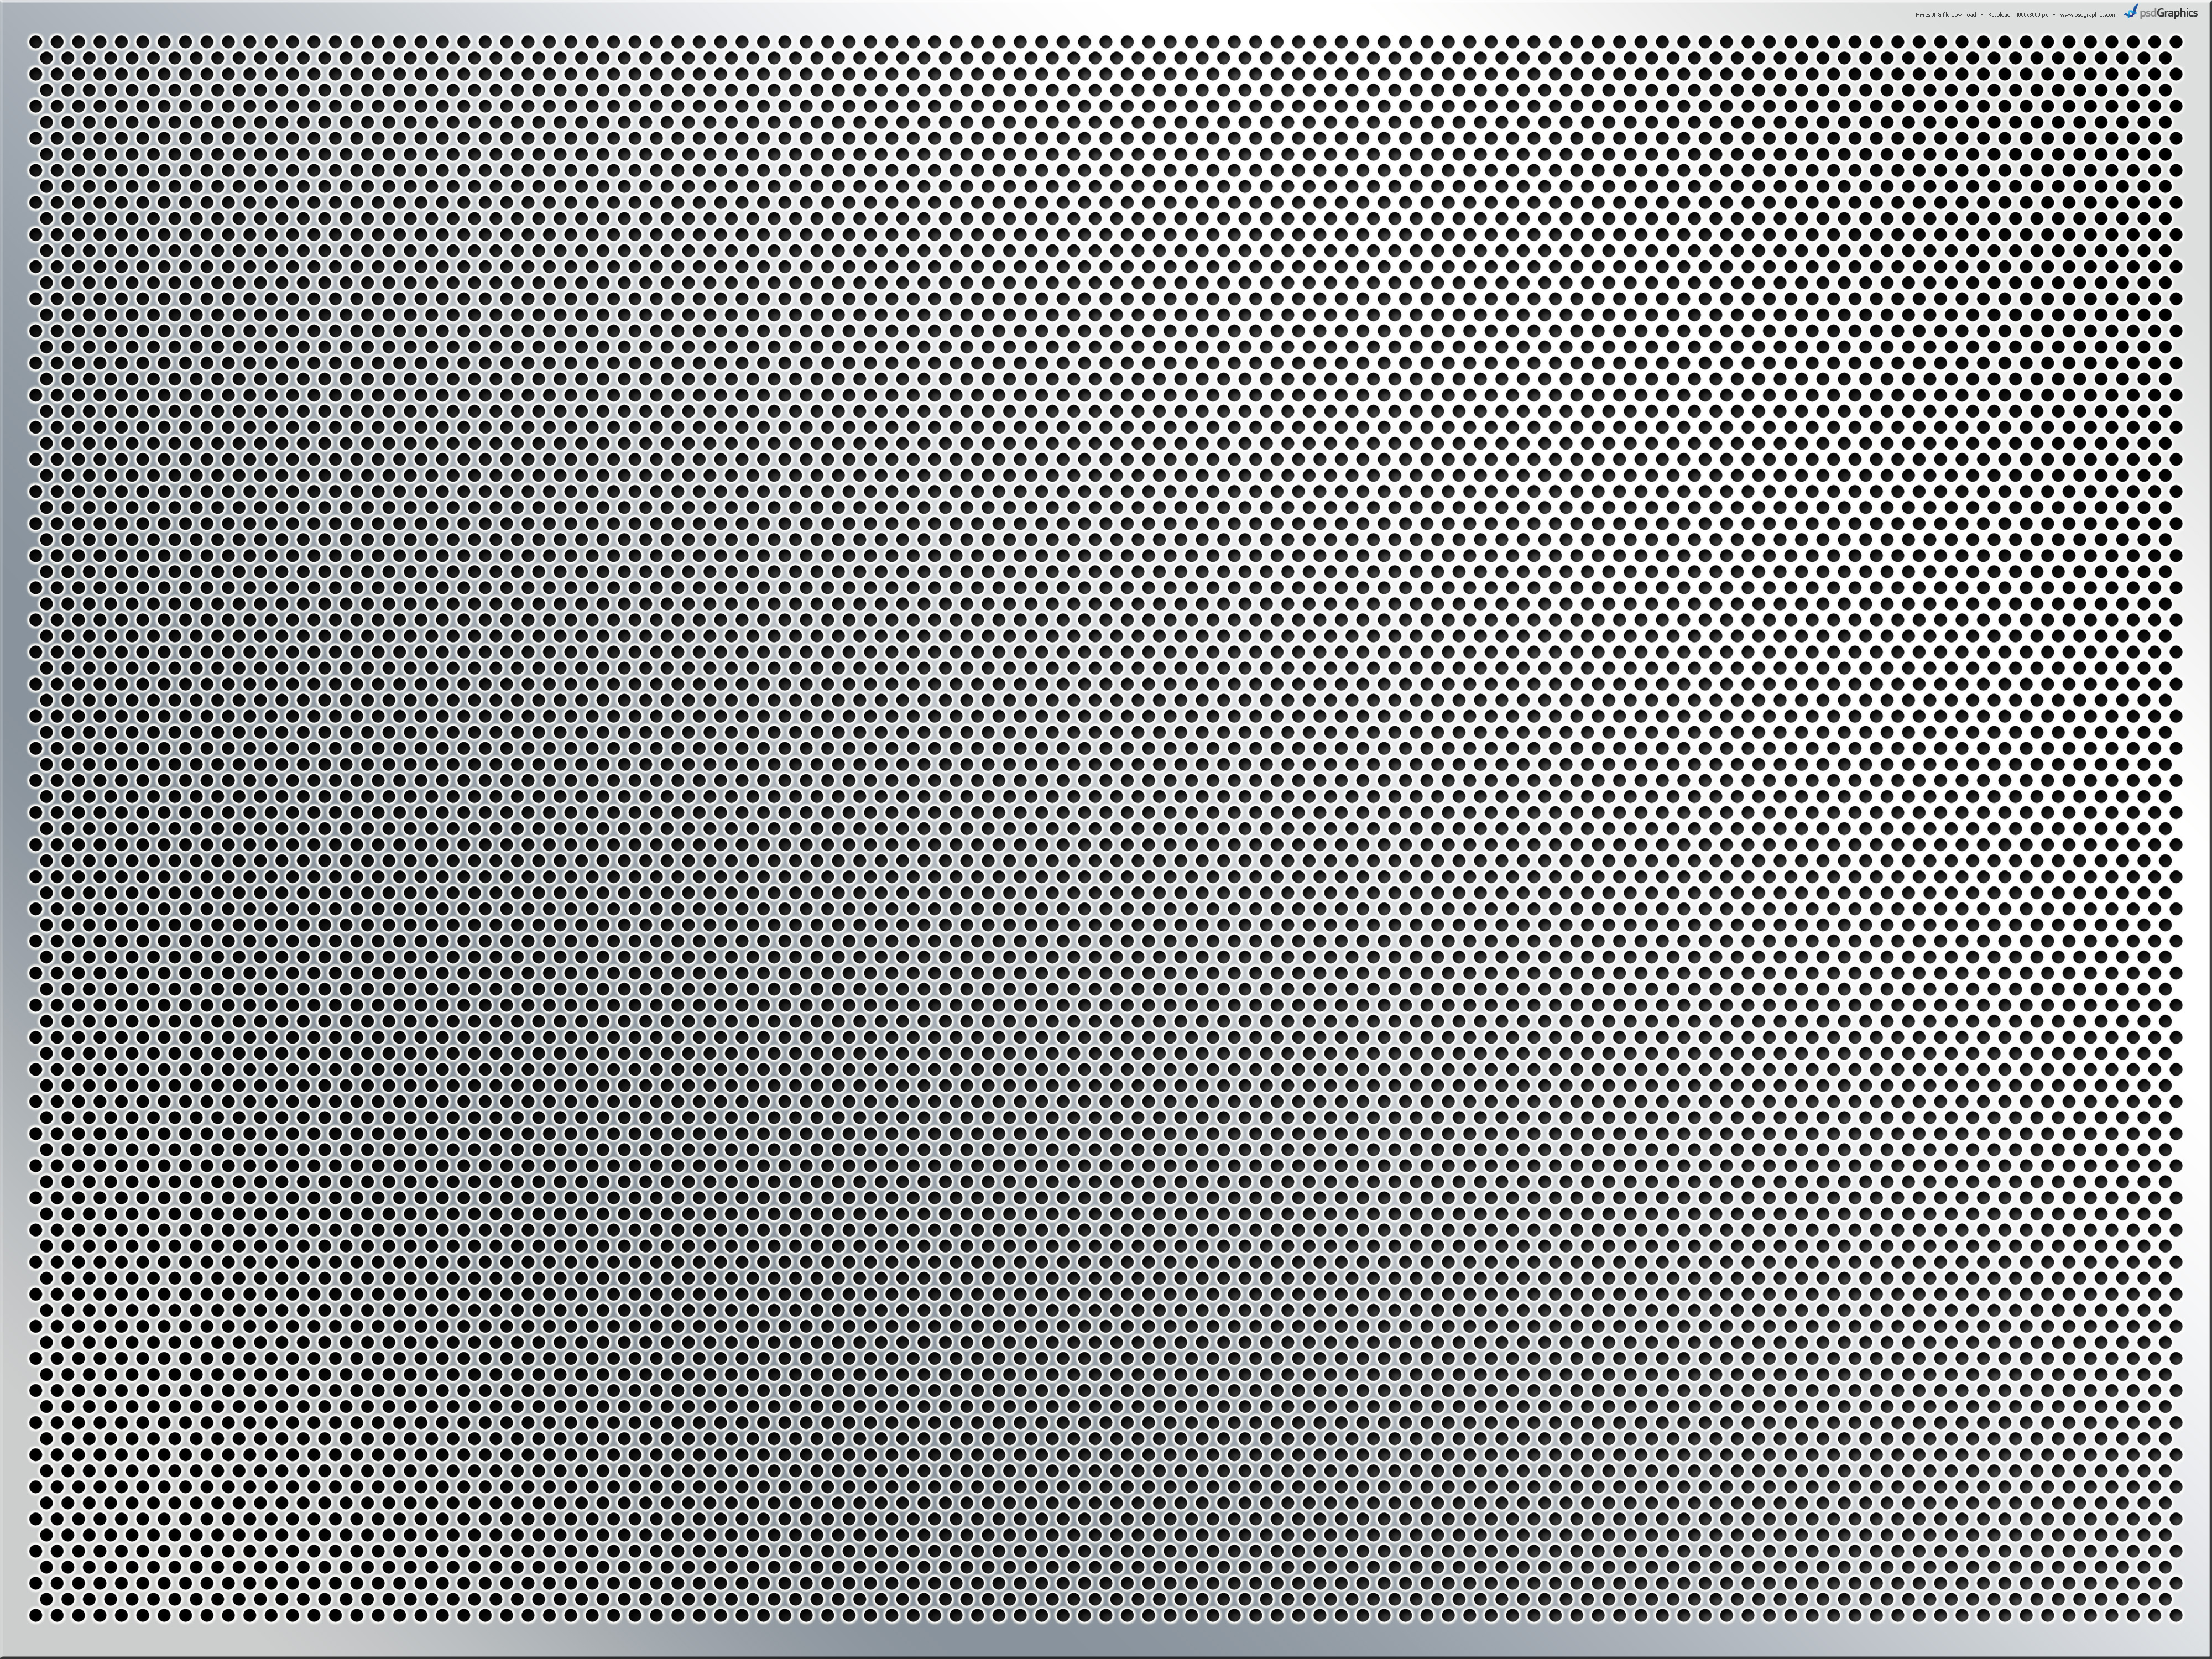 Stainless Steel Mesh Background Psdgraphics